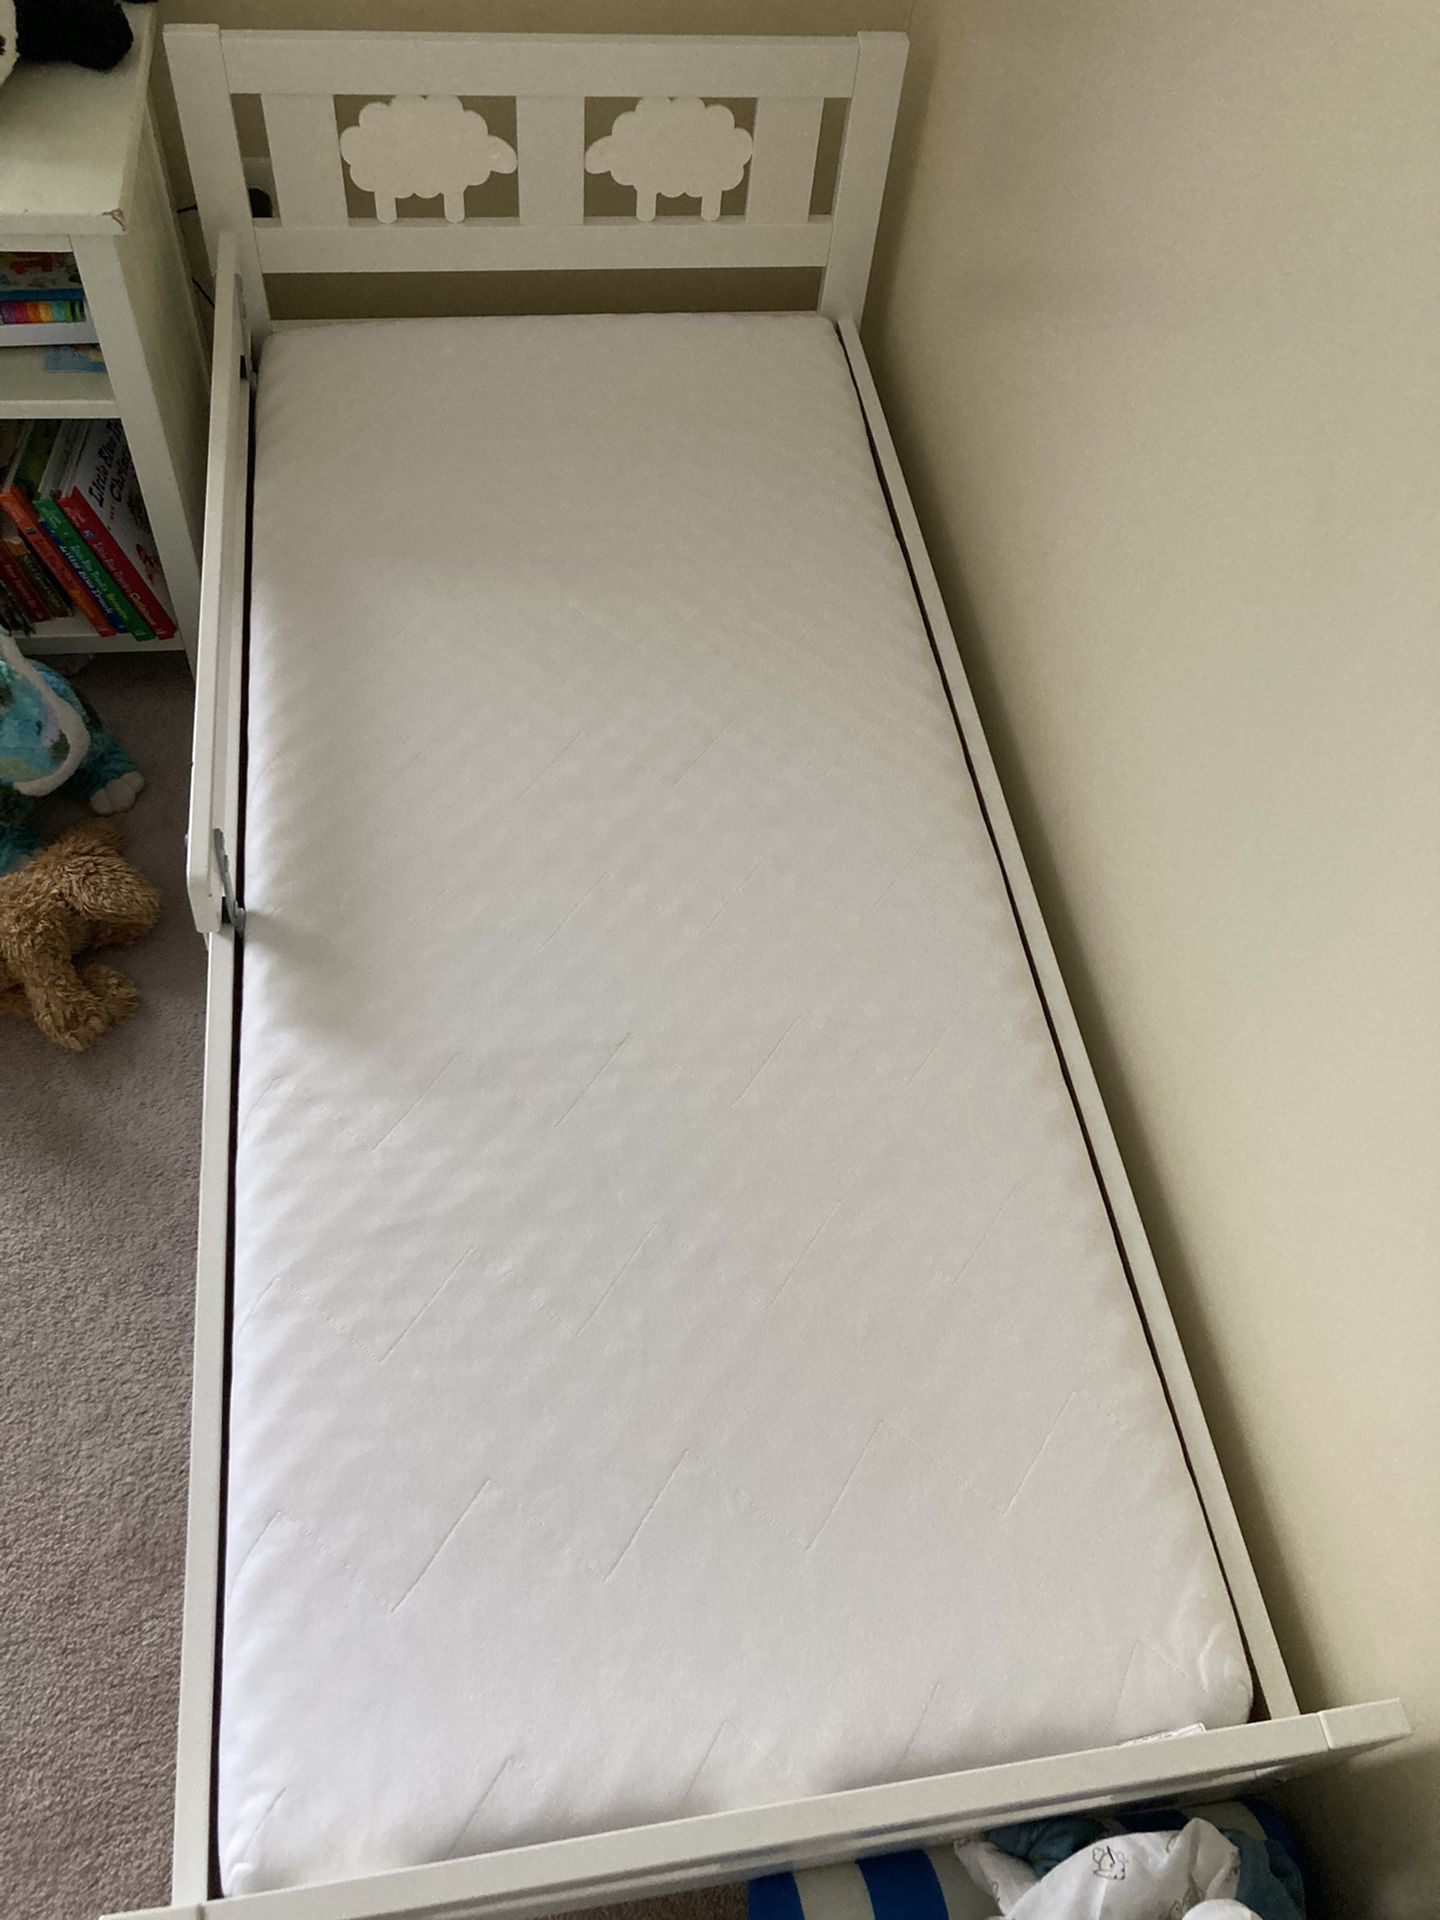 Toddler/ Youth Bed (Kritter)